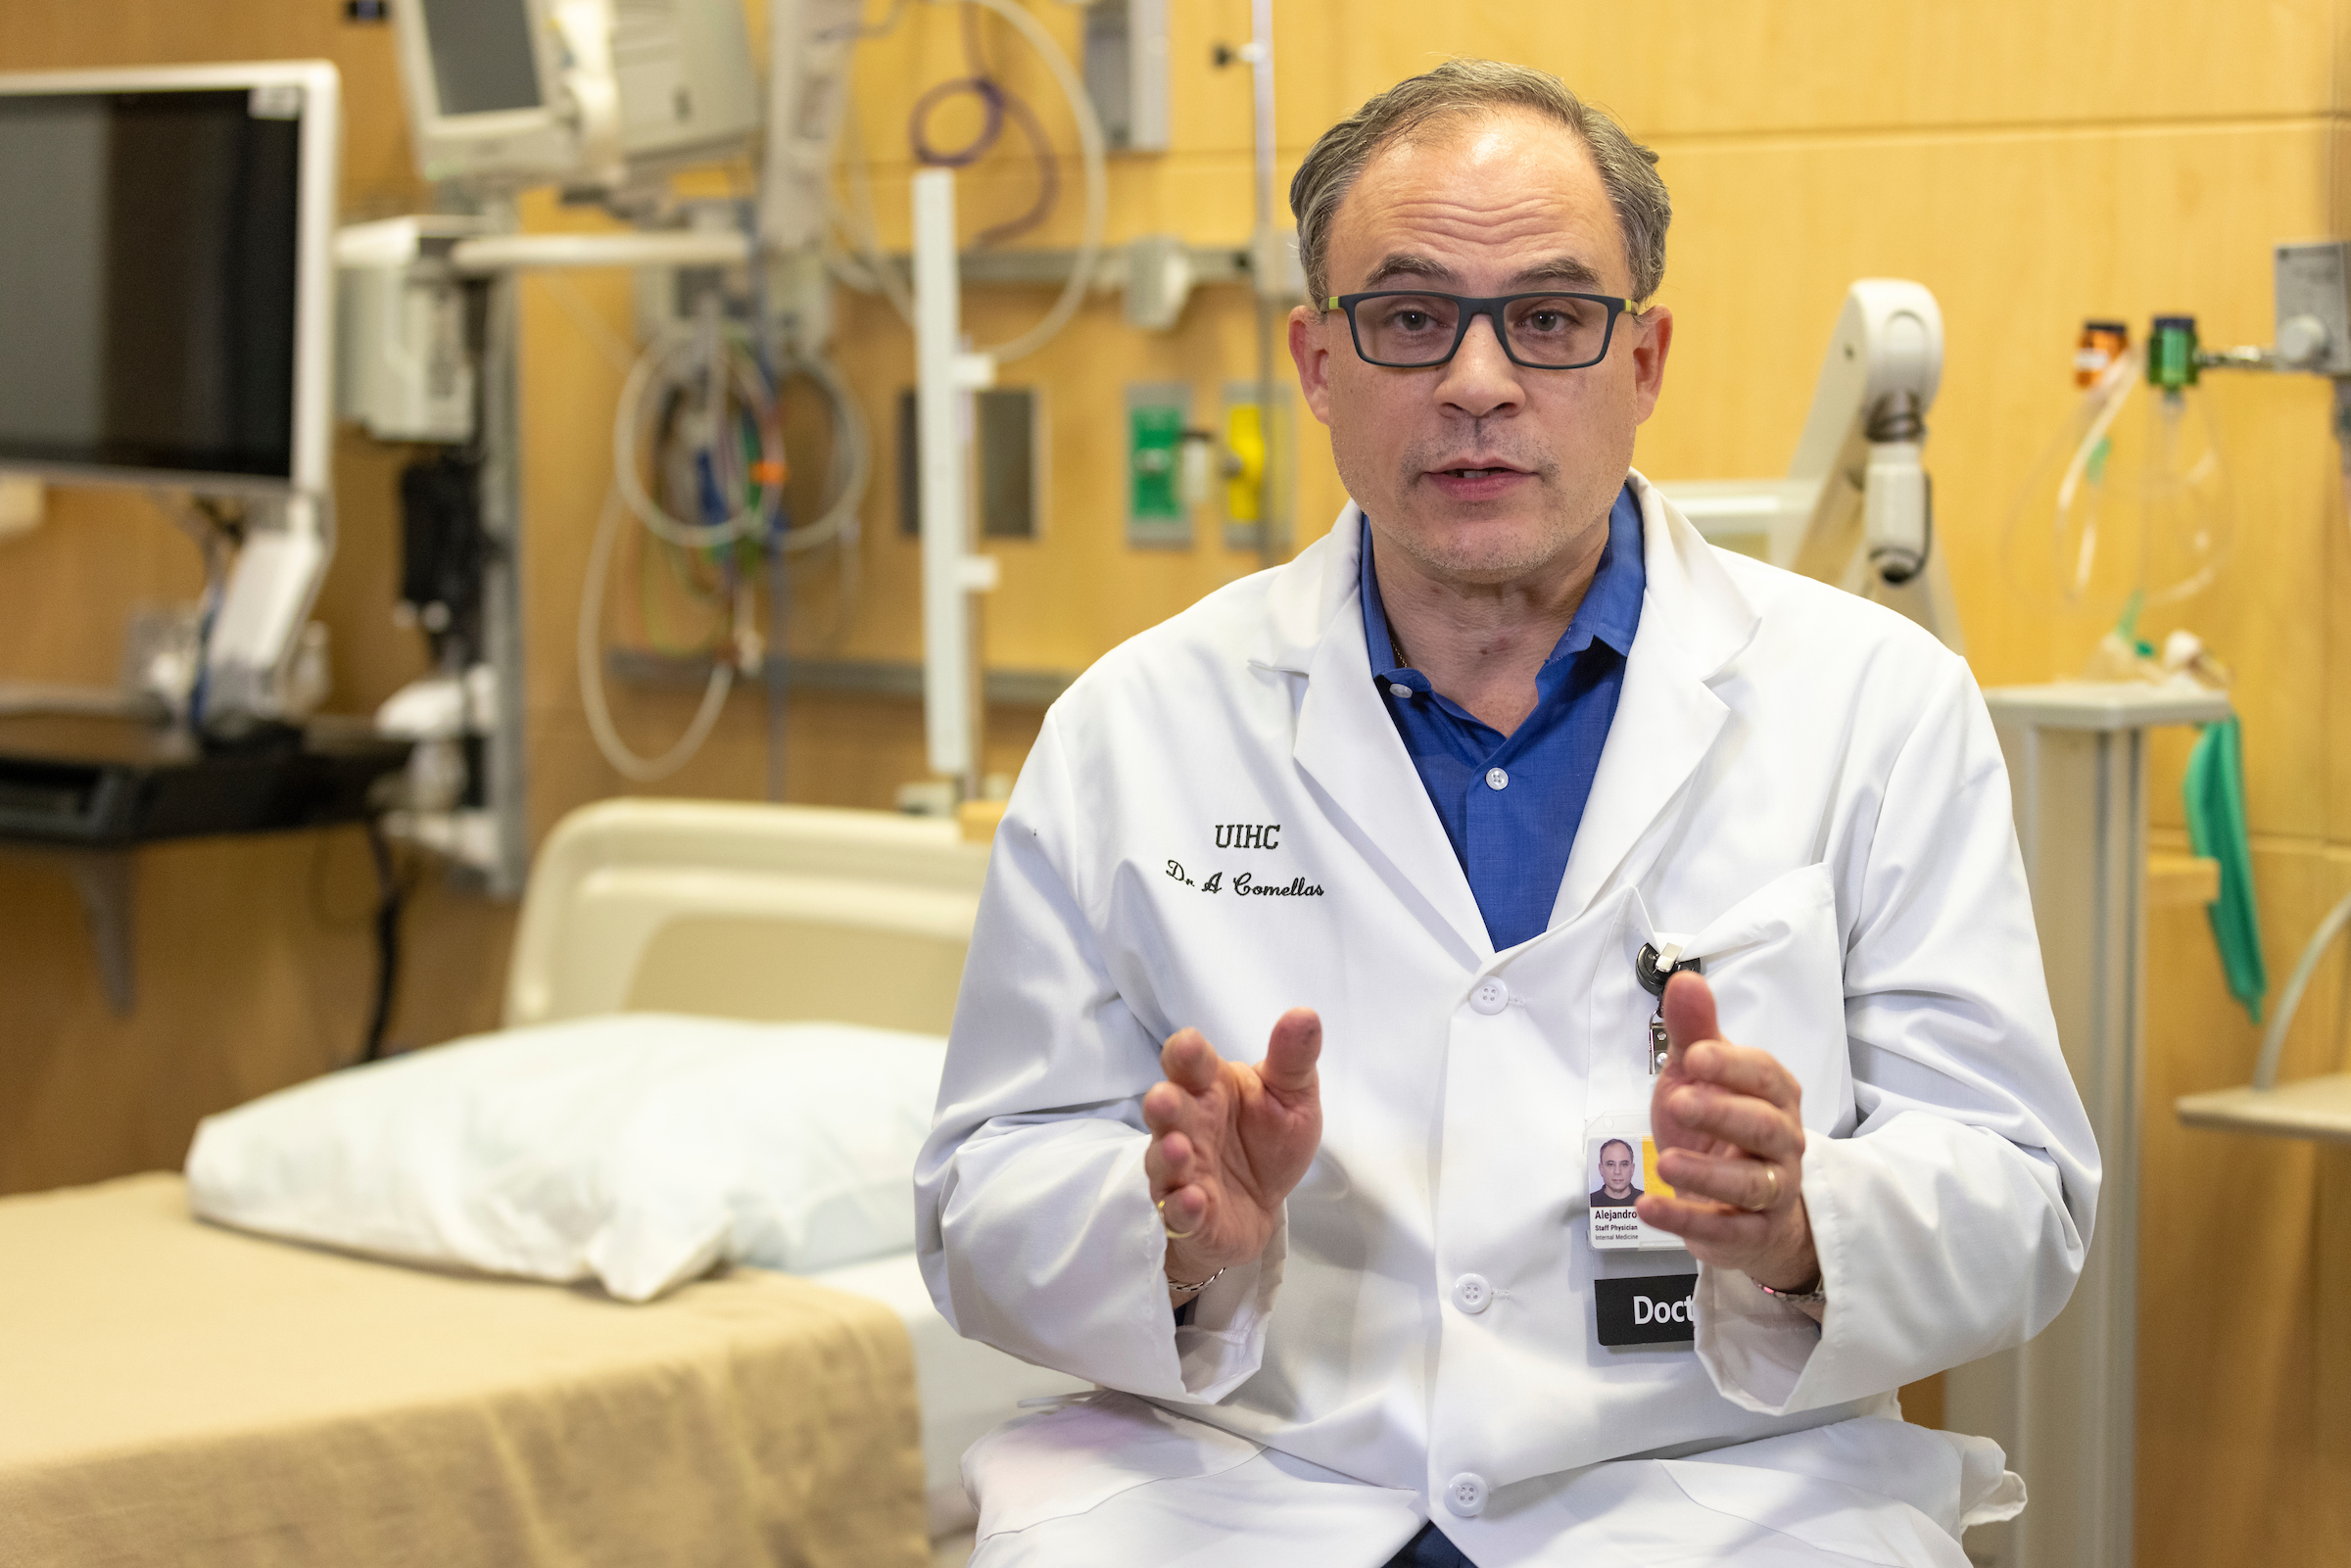 Alejandro Comellas speaks to the camera in a white coat in a hospital room.